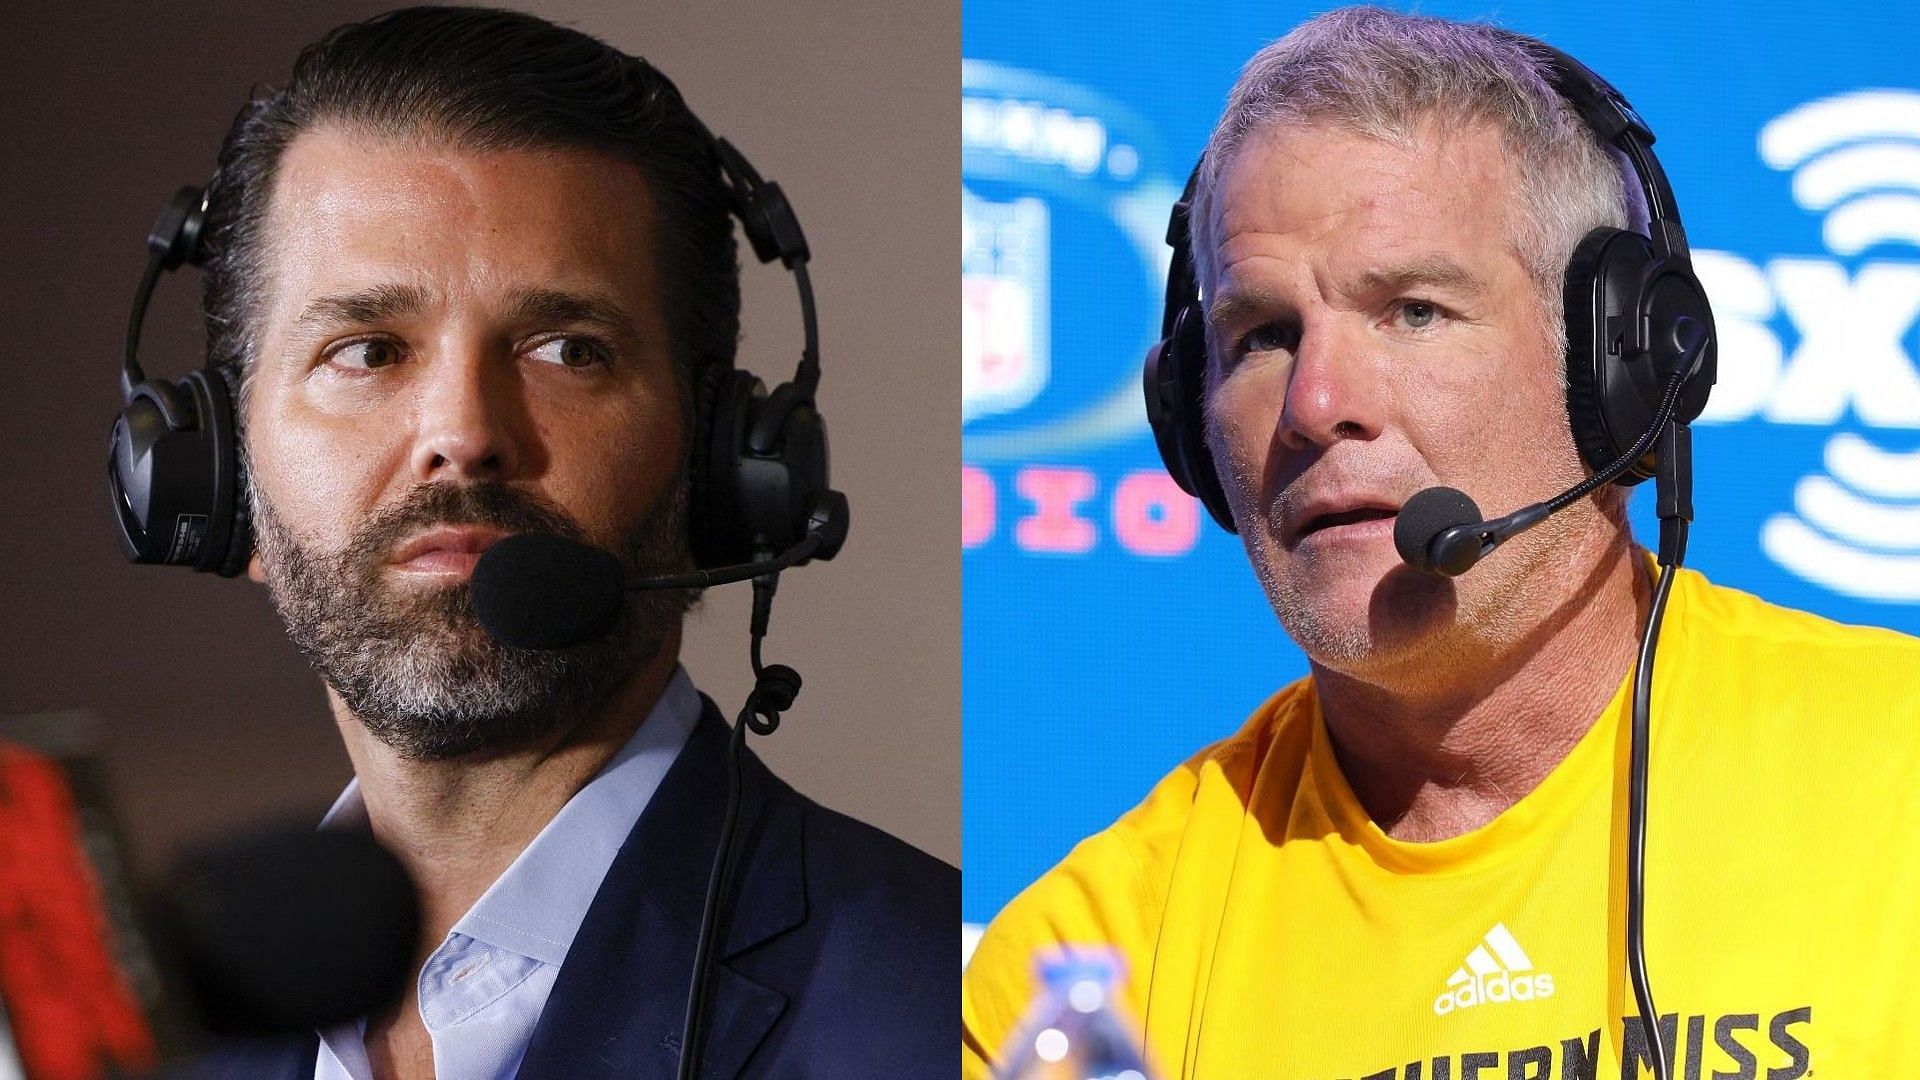 Brett Favre calls out media in interview with Donald Trump Jr. 